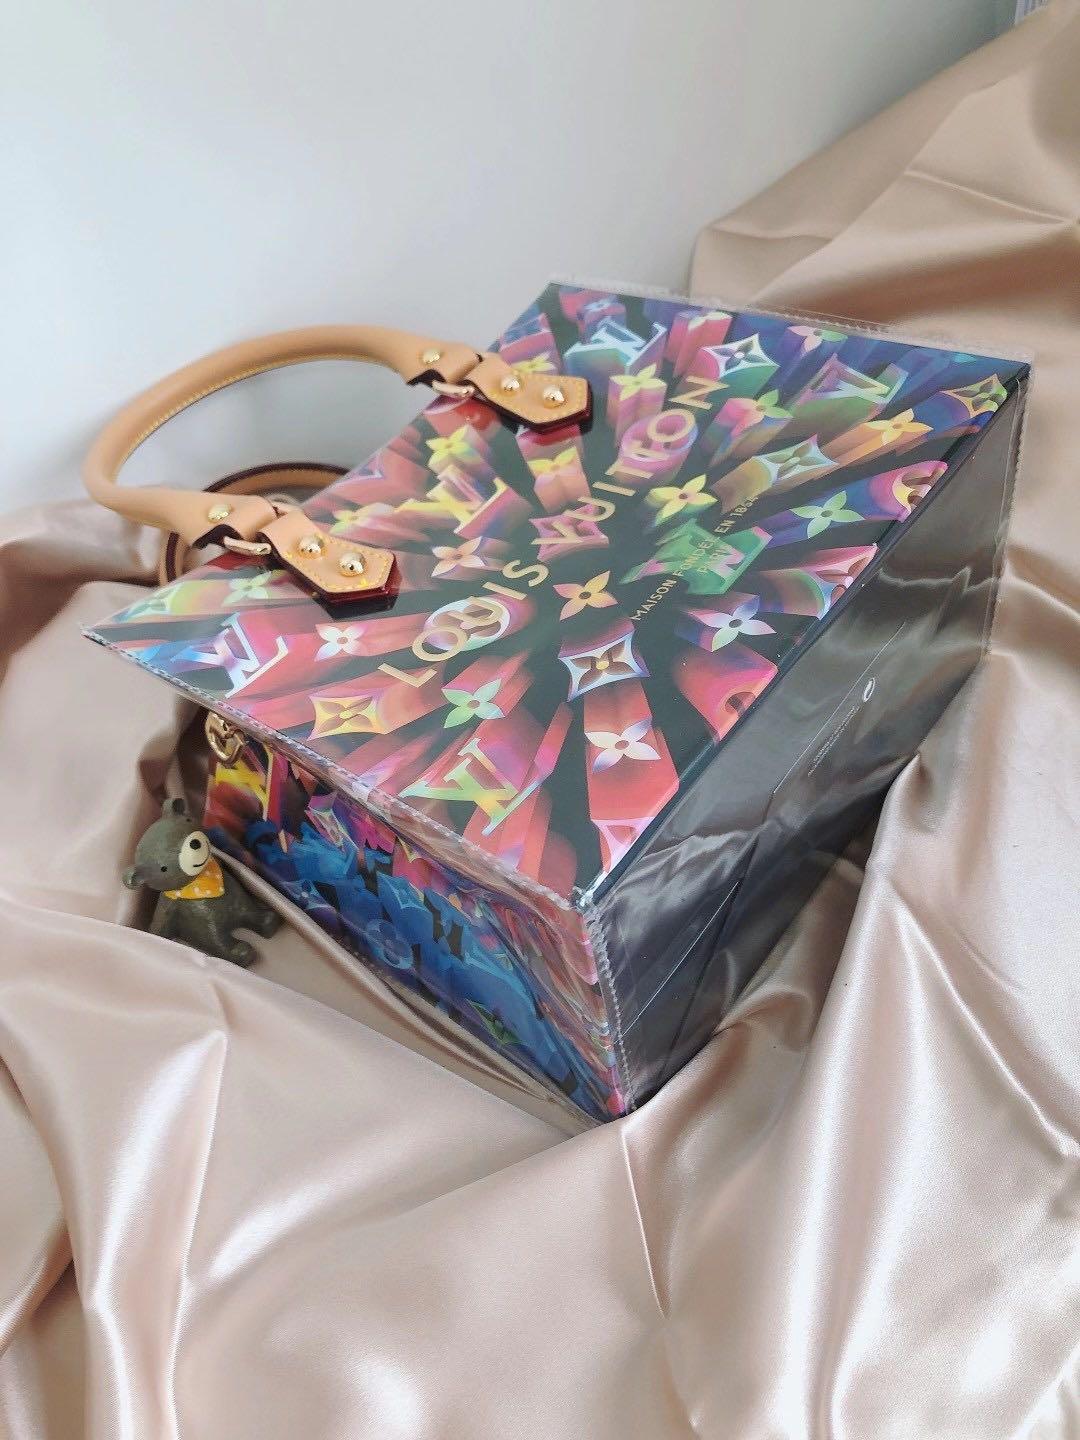 Tradara - Can now upload the Louis Vuitton handbag I painted for a